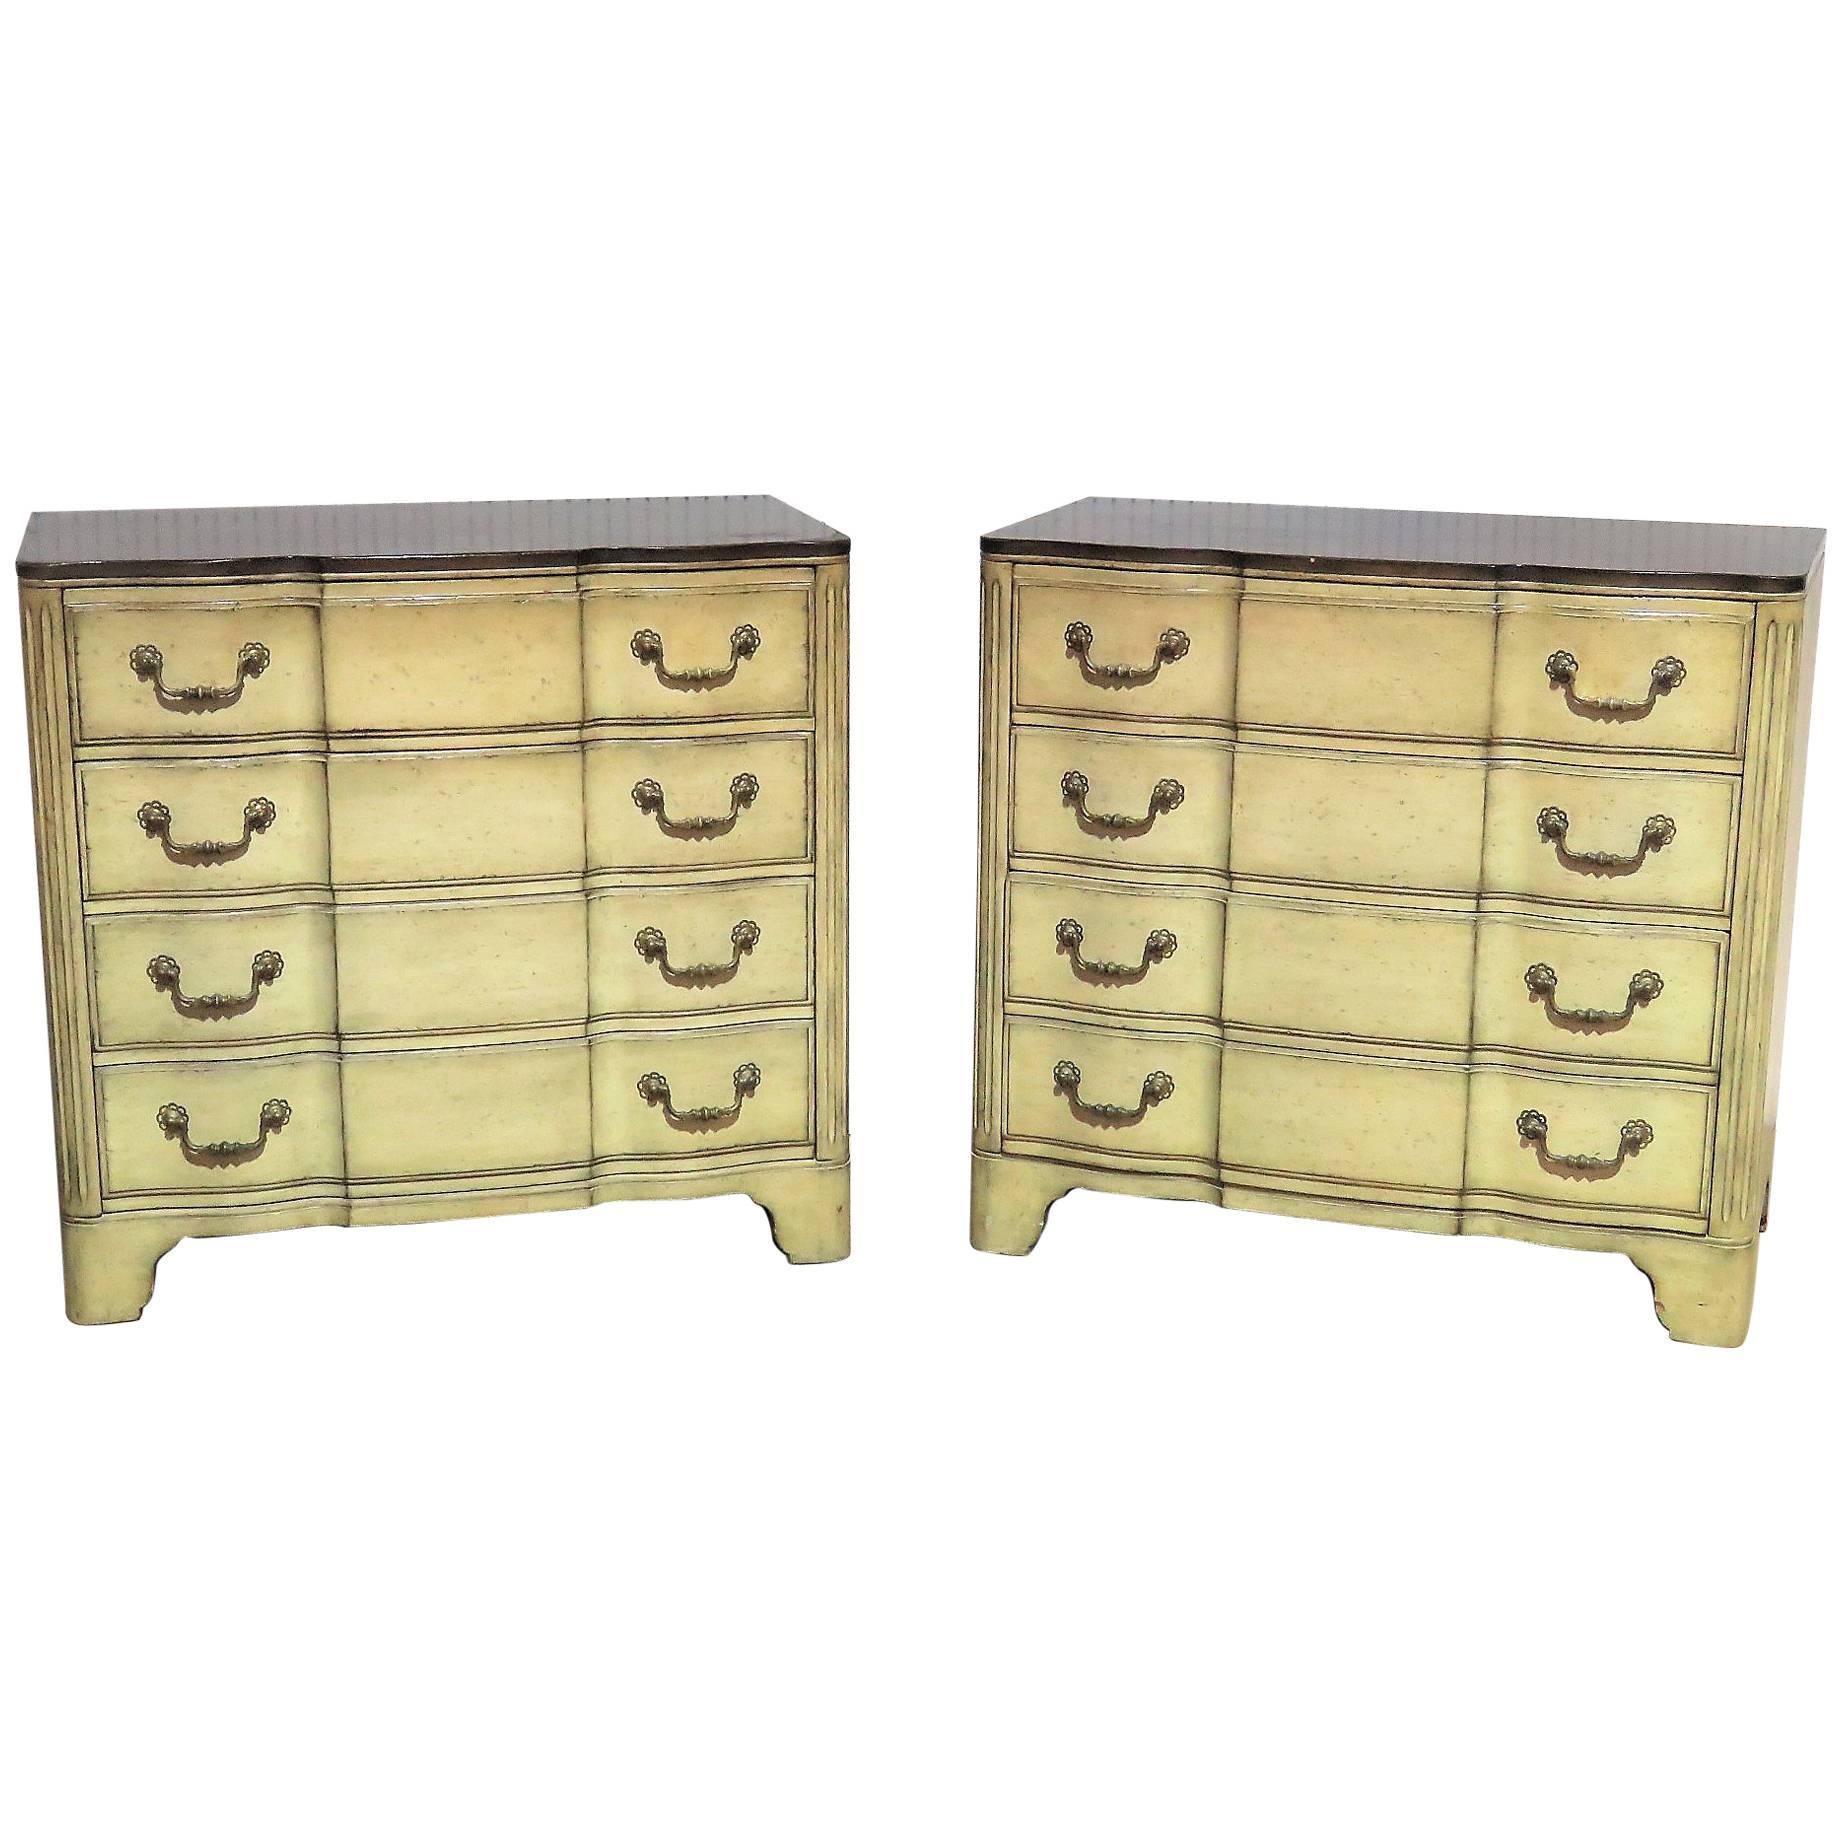 Pair of Widdicomb Provincial Style Distressed Cream Painted Commodes